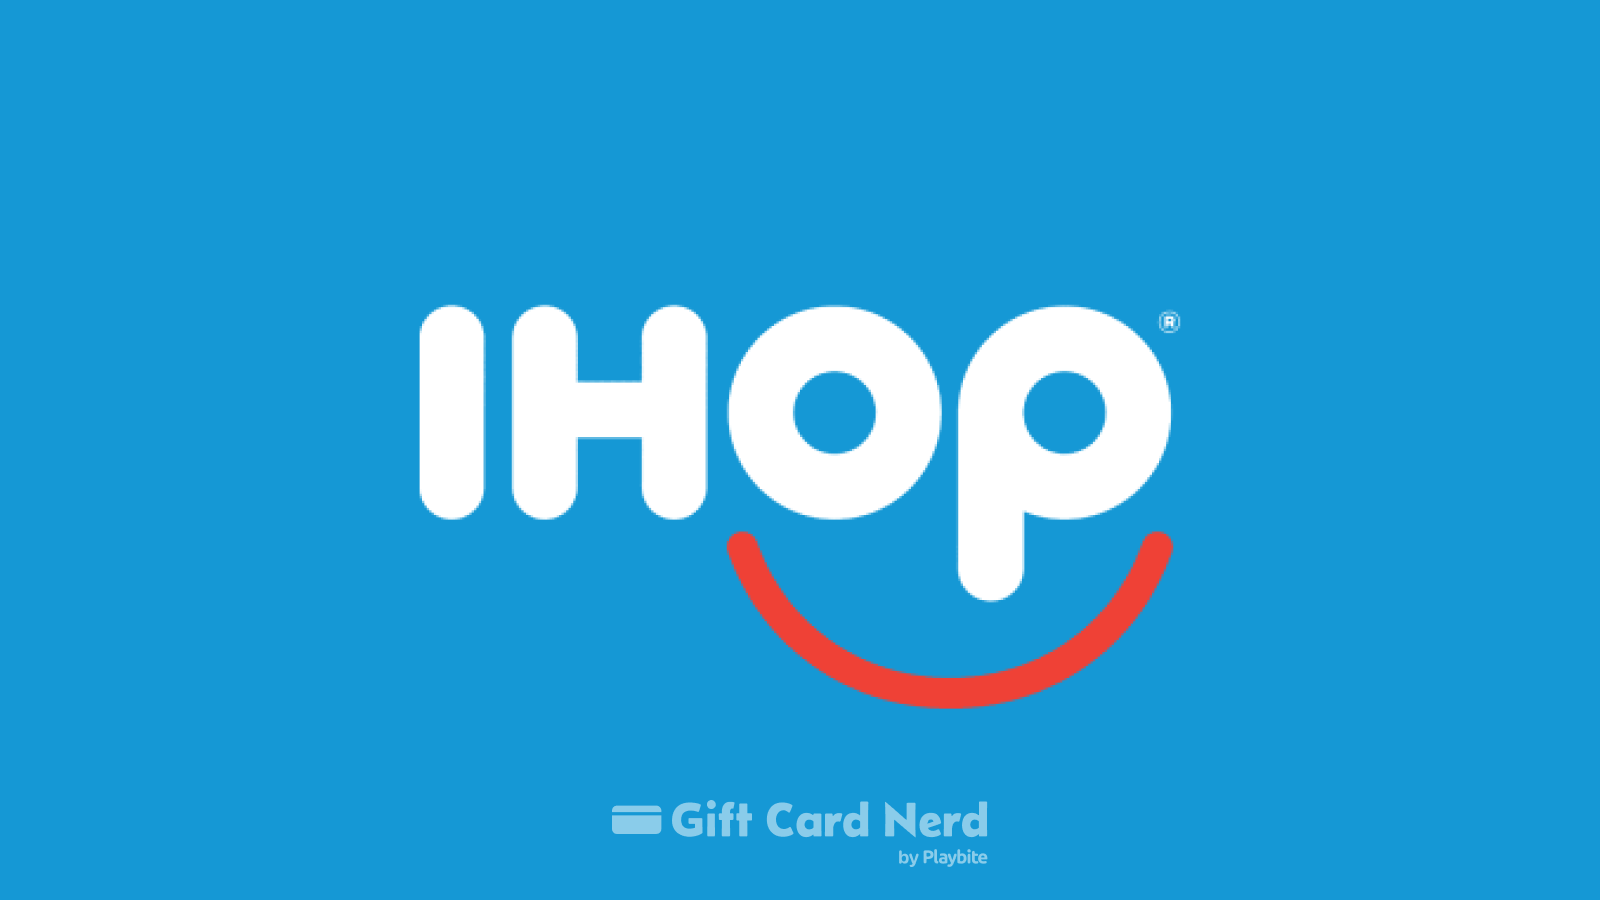 Can I Use an IHOP Gift Card on Postmates?